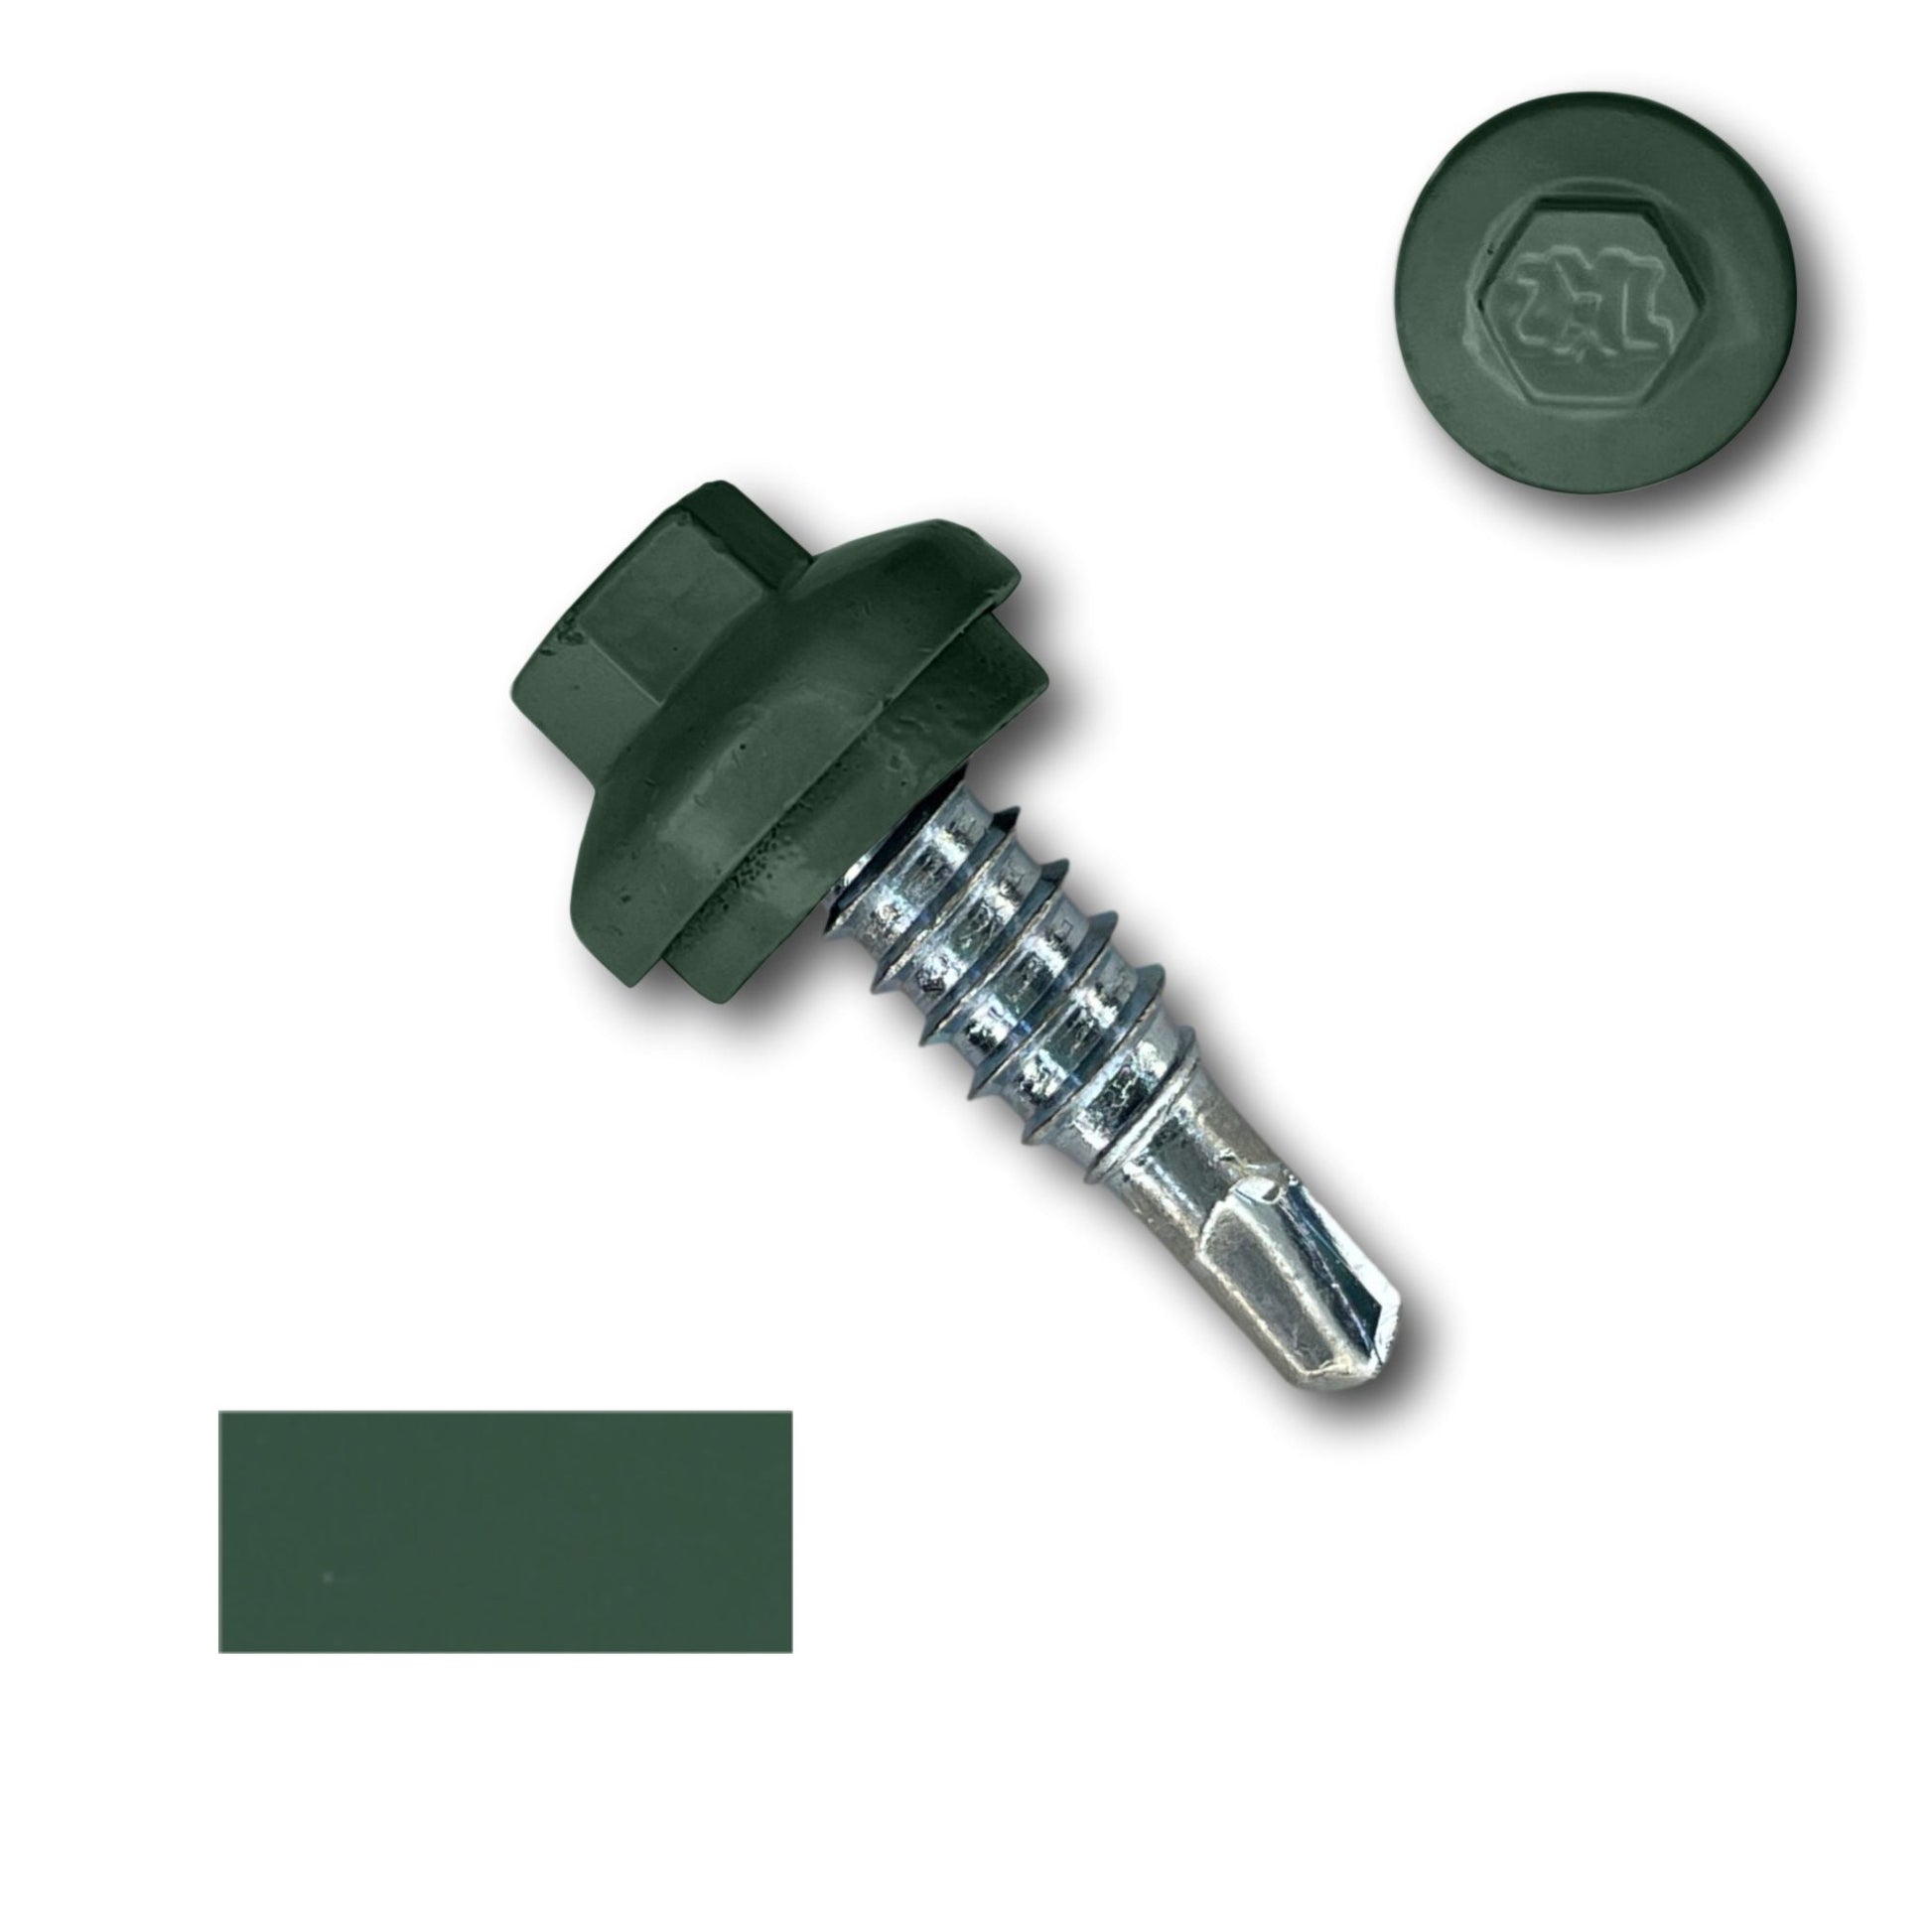 A green #14 x 7/8" Stitch Lap ZXL Dome Cap Metal Building Screws, Self-Drilling - 250 Pack by Perma Cover with a hexagonal head and sealing washer, perfect for secure fastening, is shown. The image includes a top view circle of the head, a side view of the screw, and a rectangular color swatch matching the ZXL Dome Cap Head.